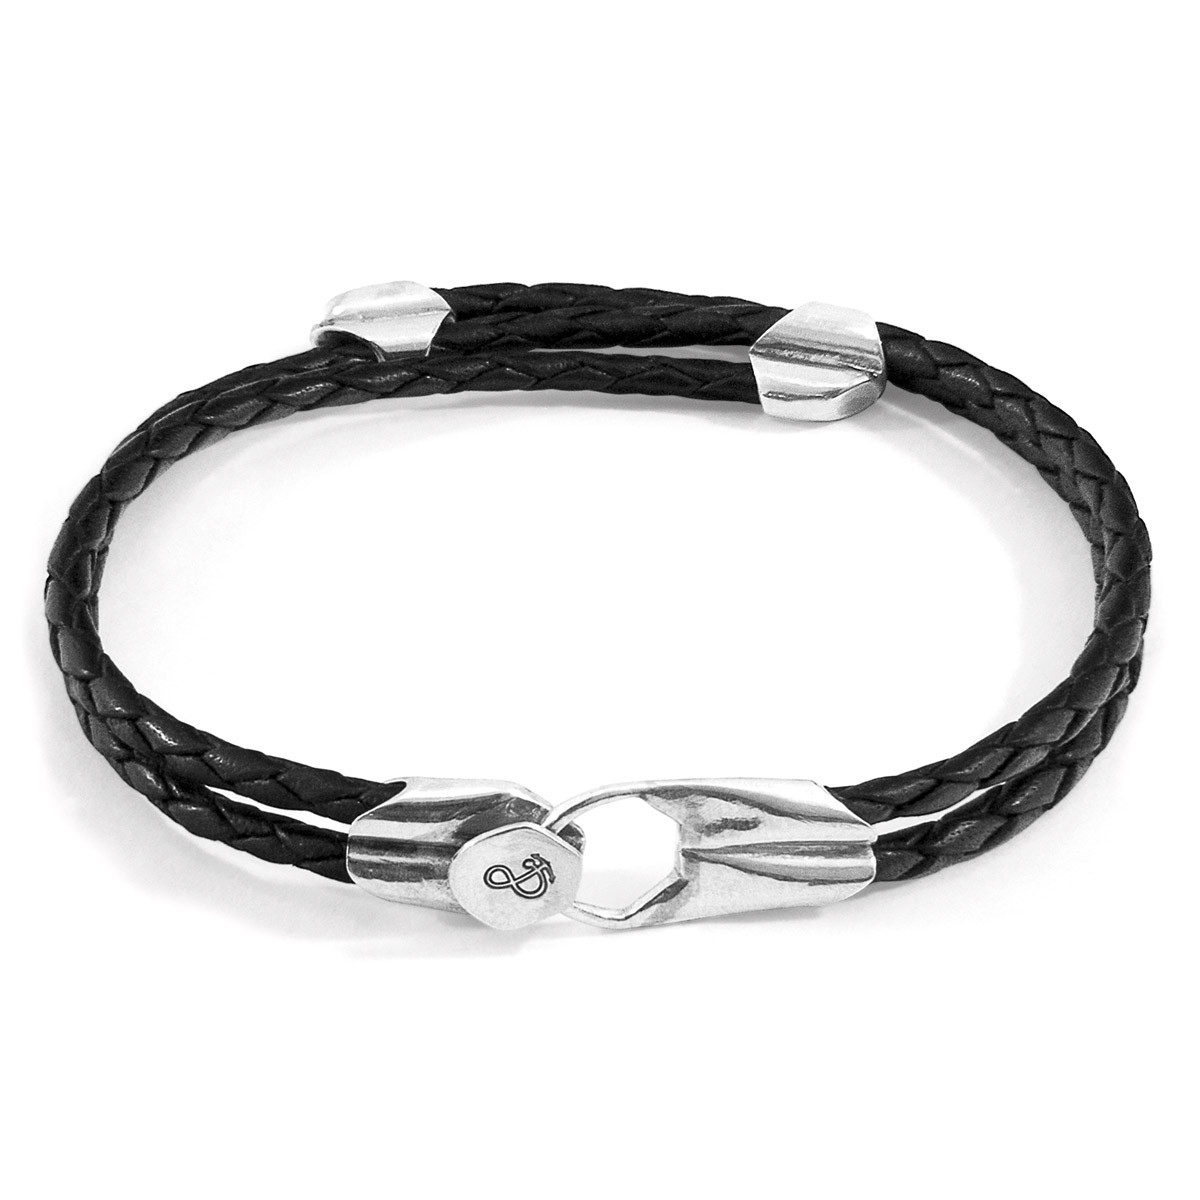 Coal Black Conway Silver and Braided Leather Bracelet